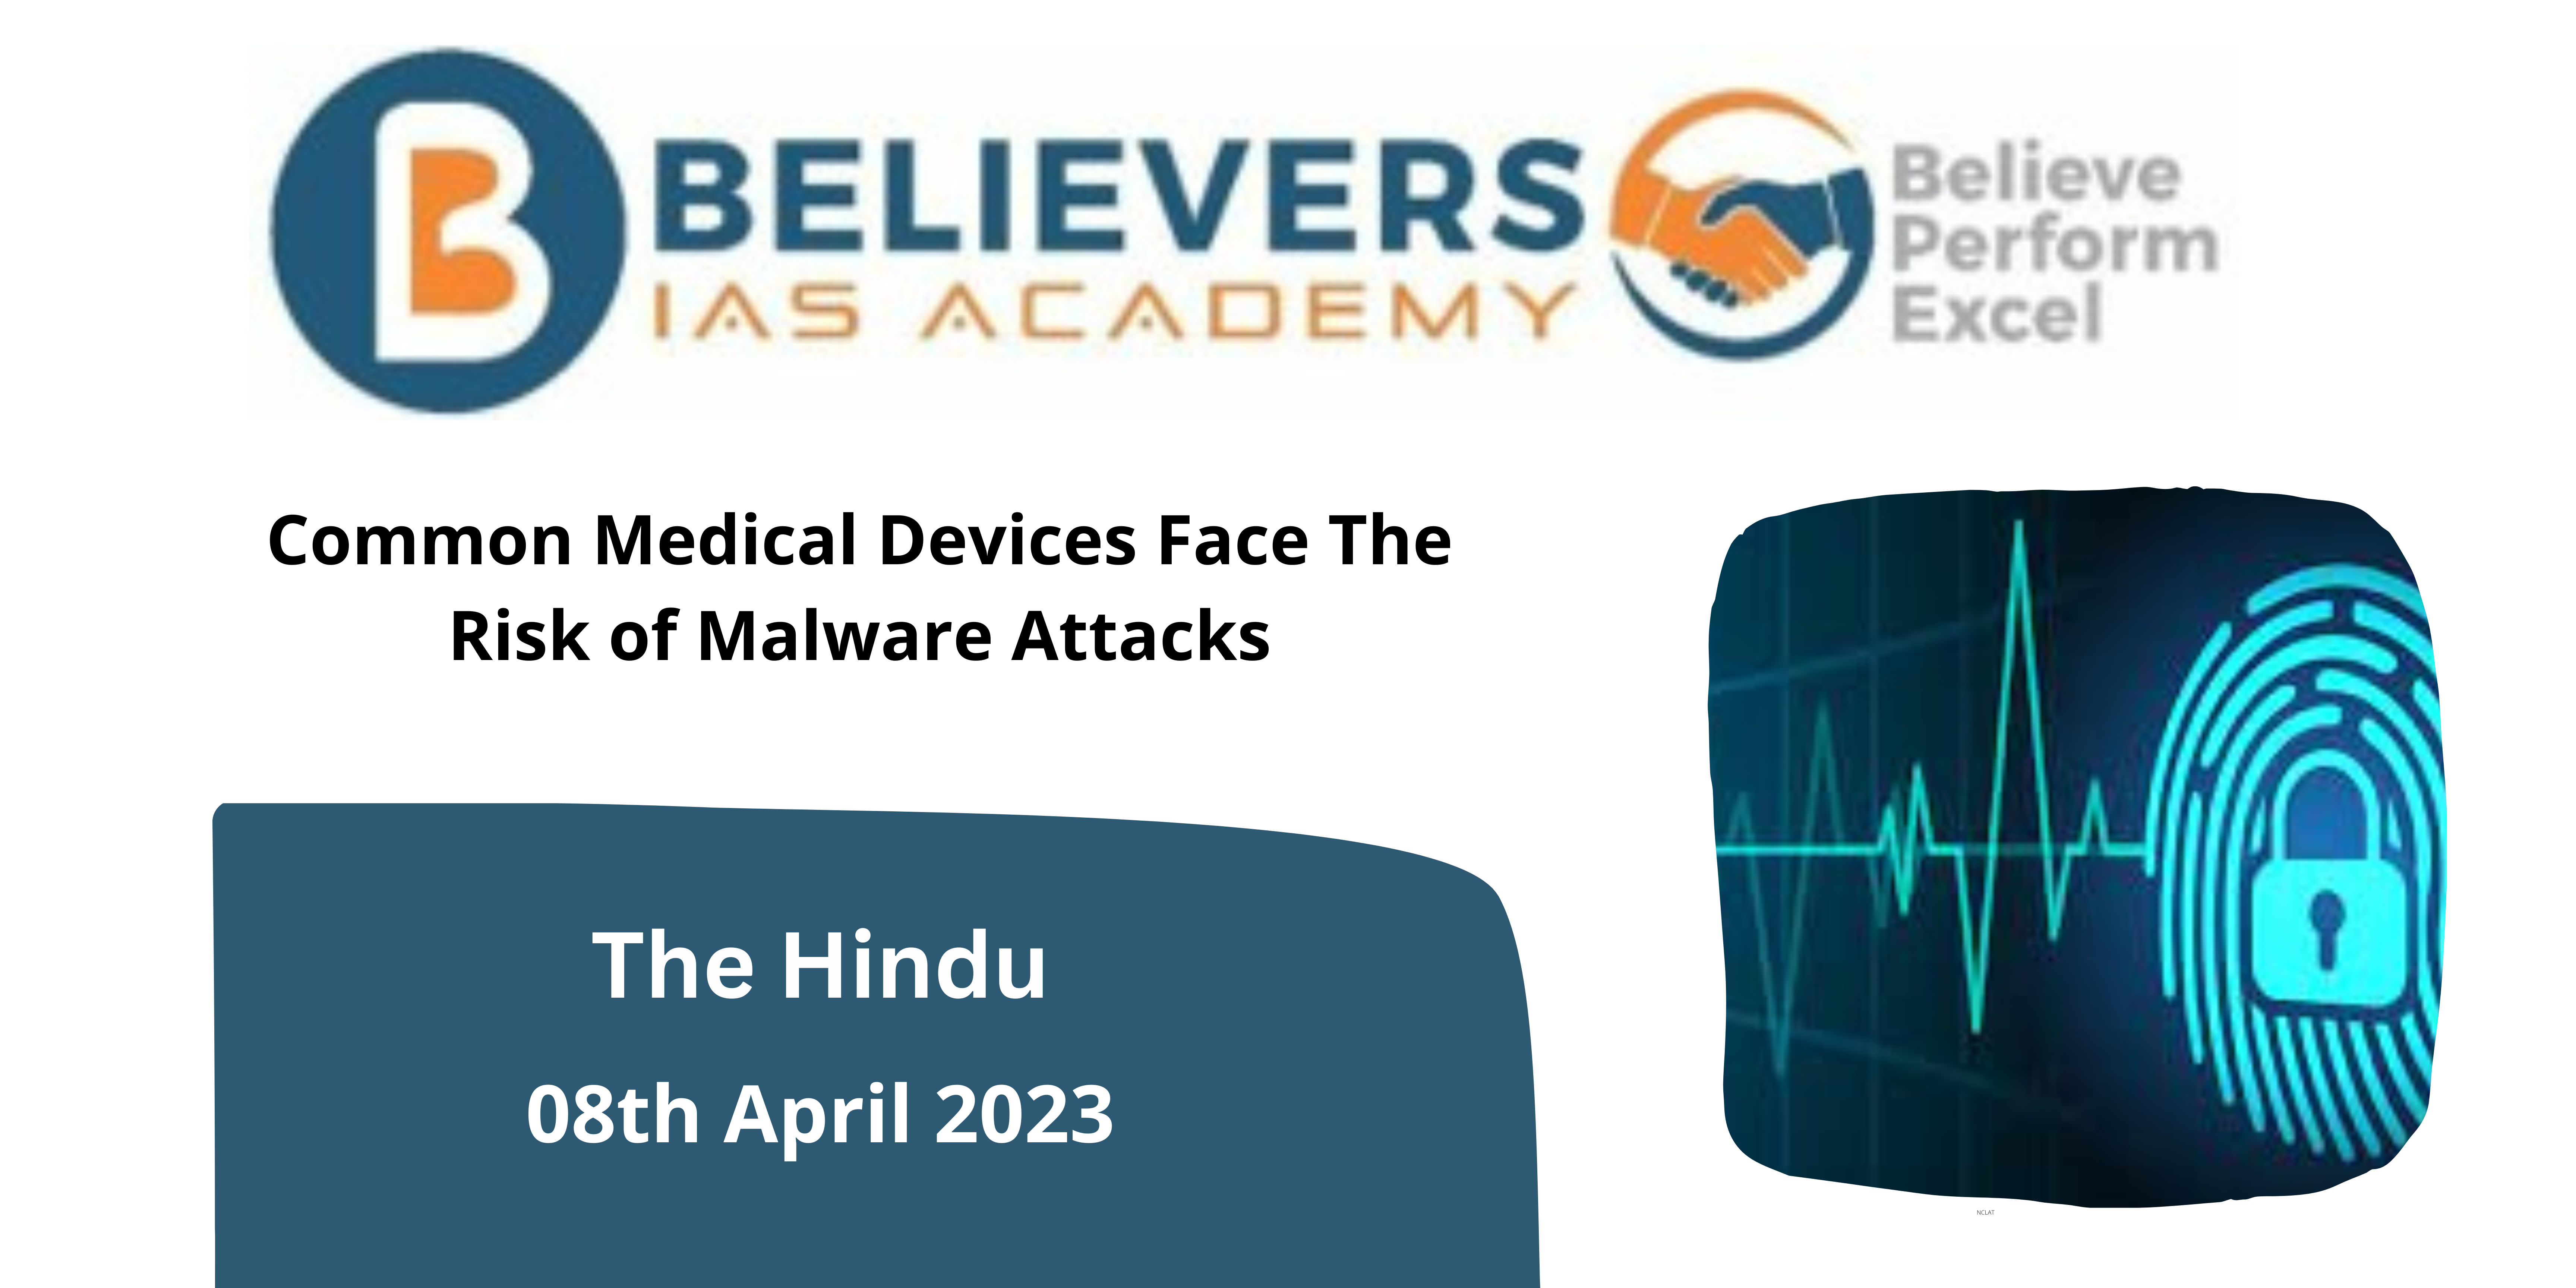 Common Medical Devices Face The Risk of Malware Attacks